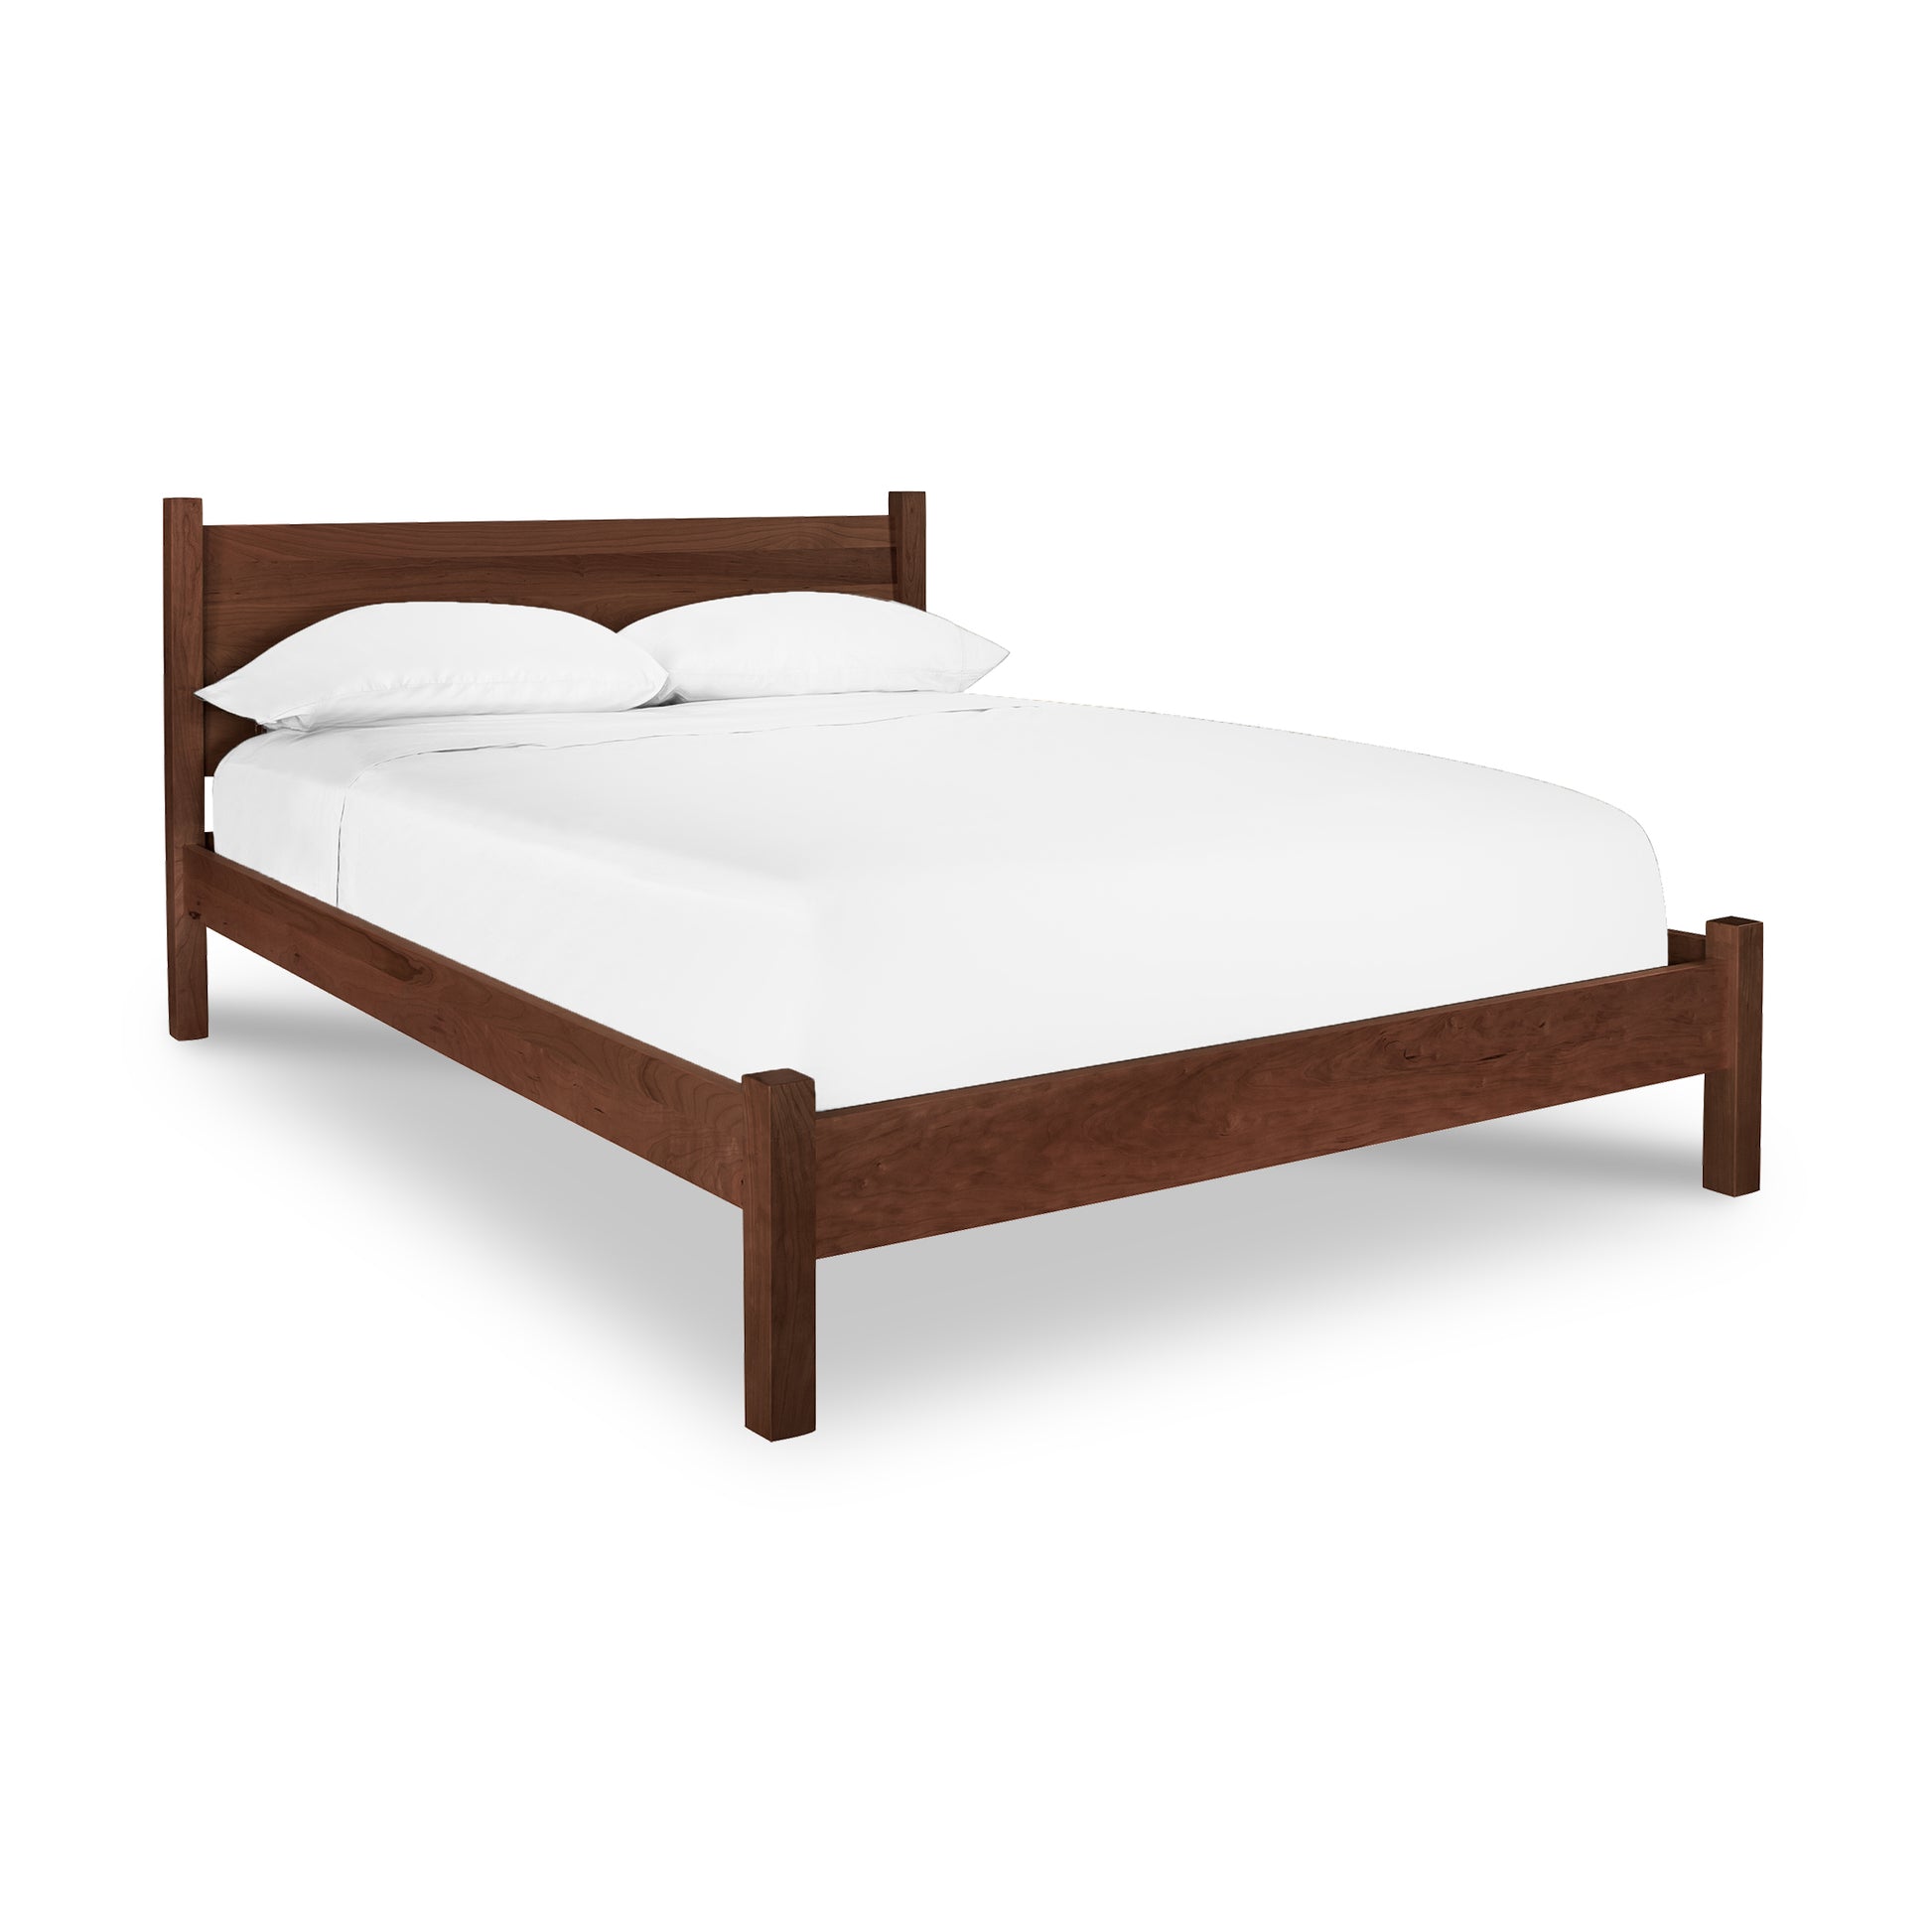 A Lyndon Furniture Classic Wood Bed handcrafted in Vermont, featuring a sustainably harvested wooden frame and adorned with white sheets.